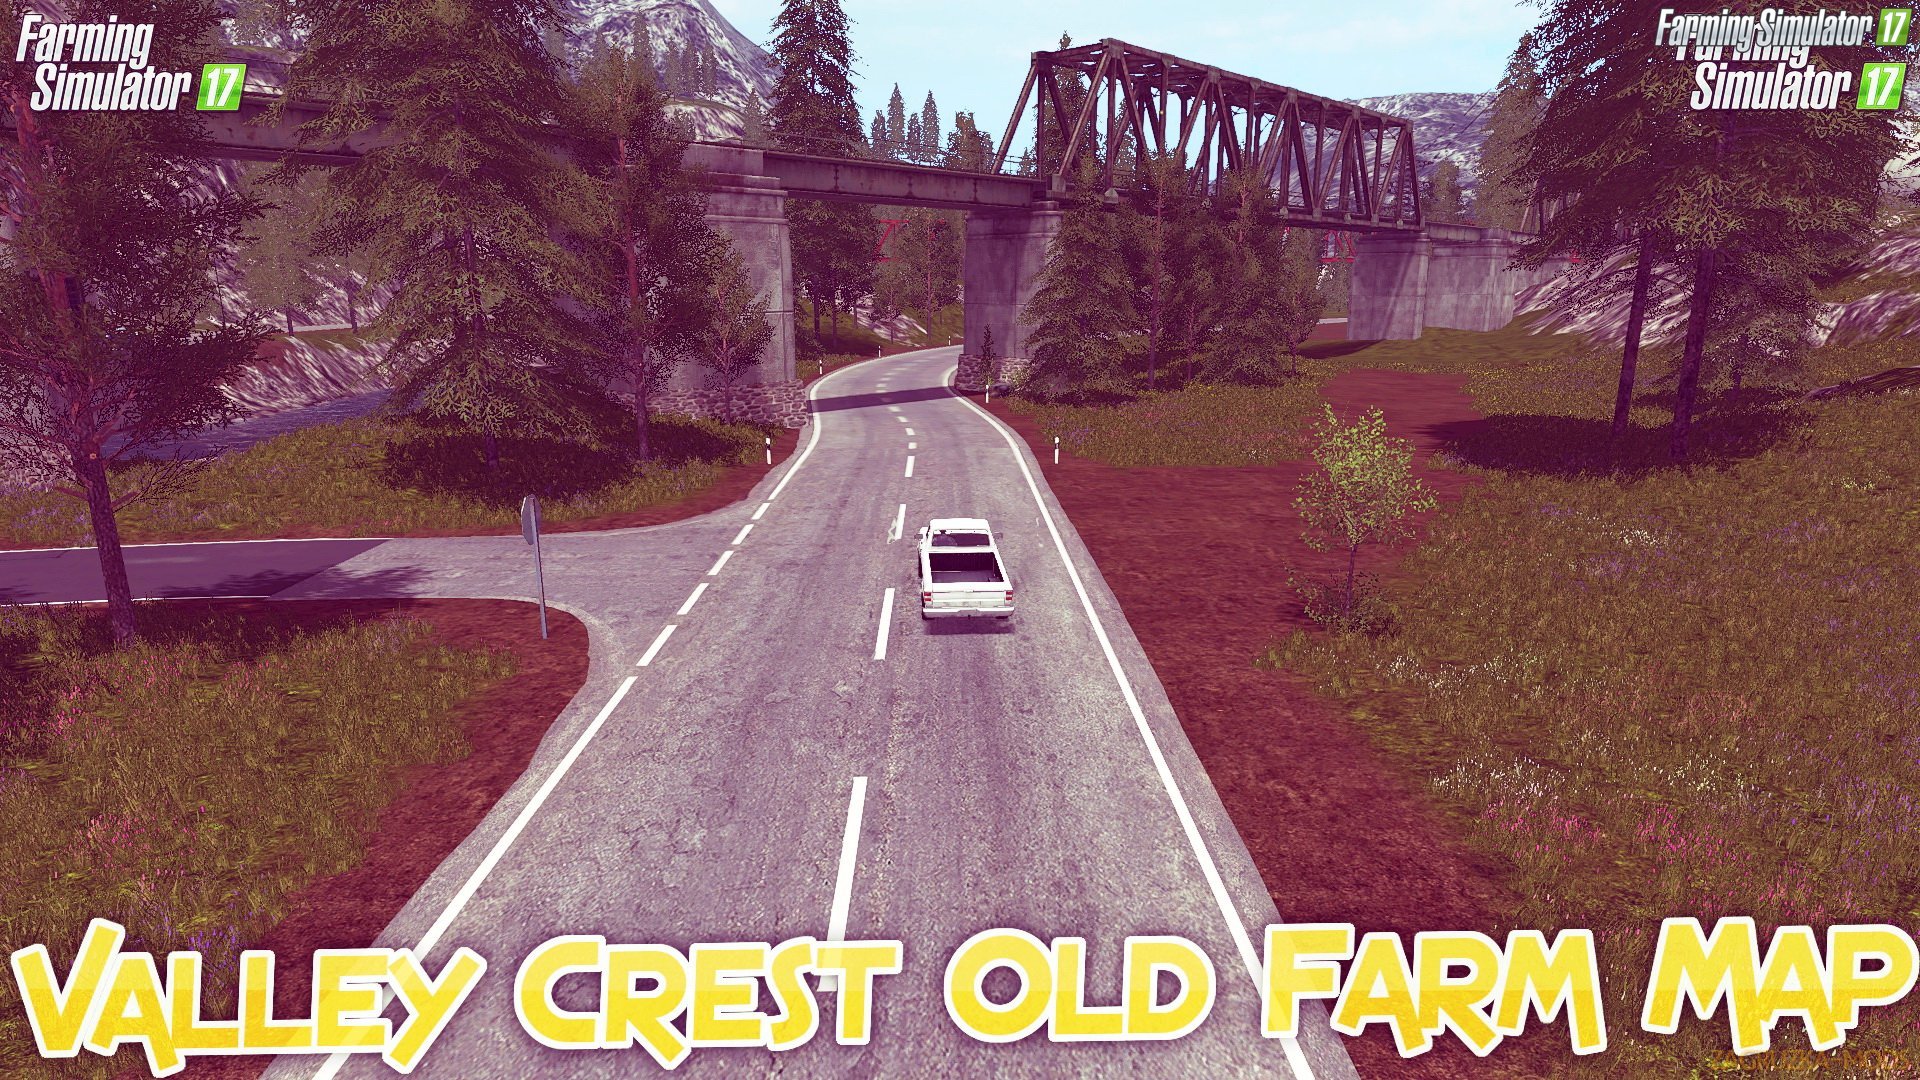 Valley Crest Old Farm Map v2.0 by Dammemax for FS 17